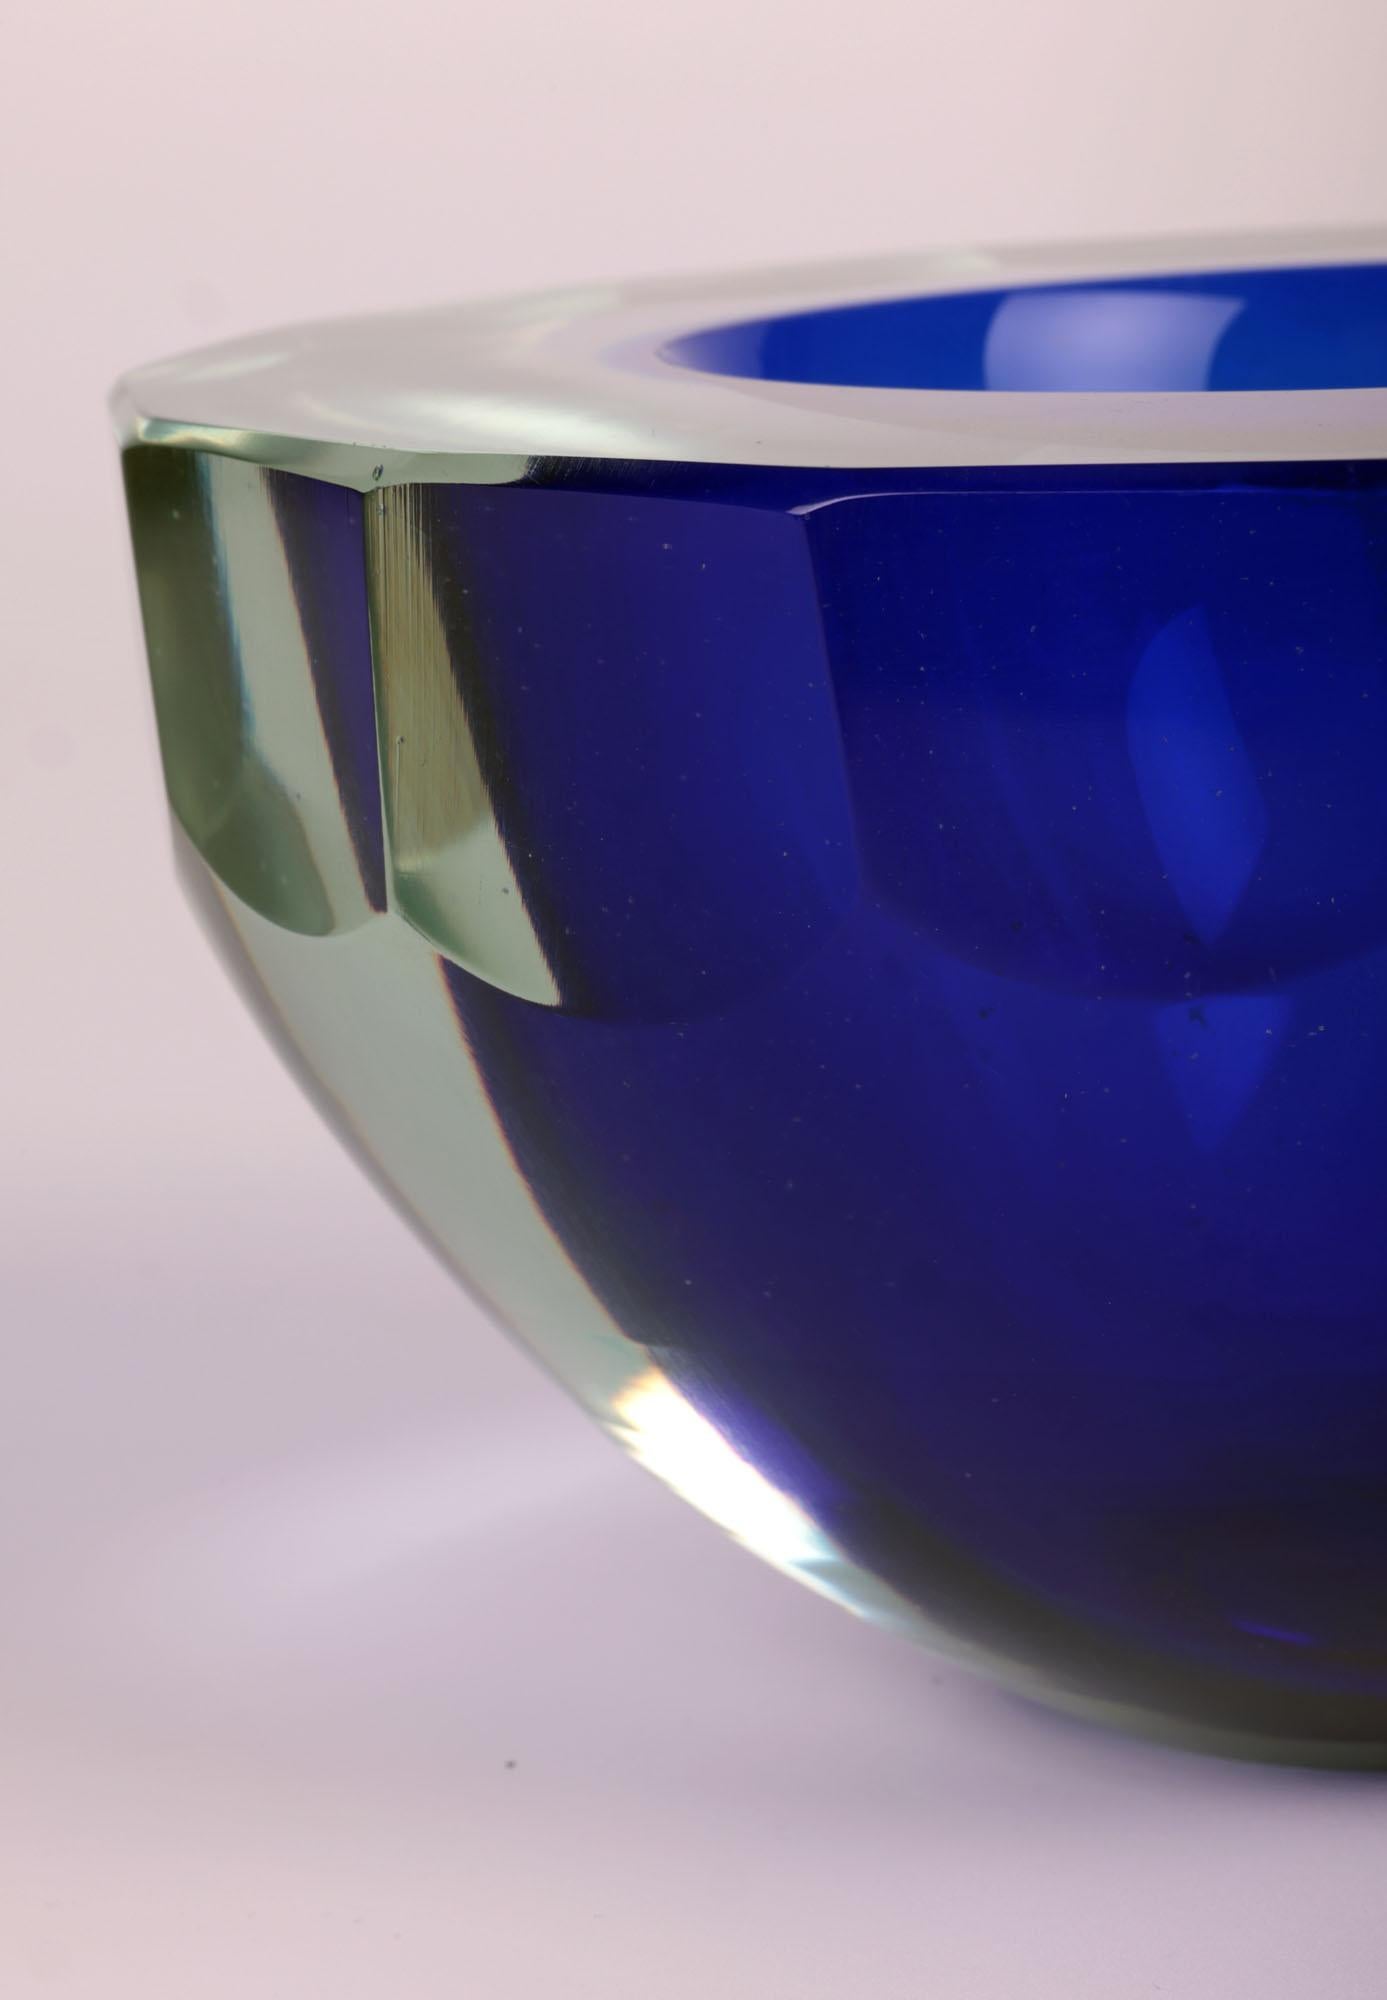 A sculptural and large hand-made Italian blue Sommerso style art glass bowl made on Murano and dating from around 1960. The heavy and thickly made bowl stands on a narrow flat polished round base and is made in a thick yellow/green tinted glass with